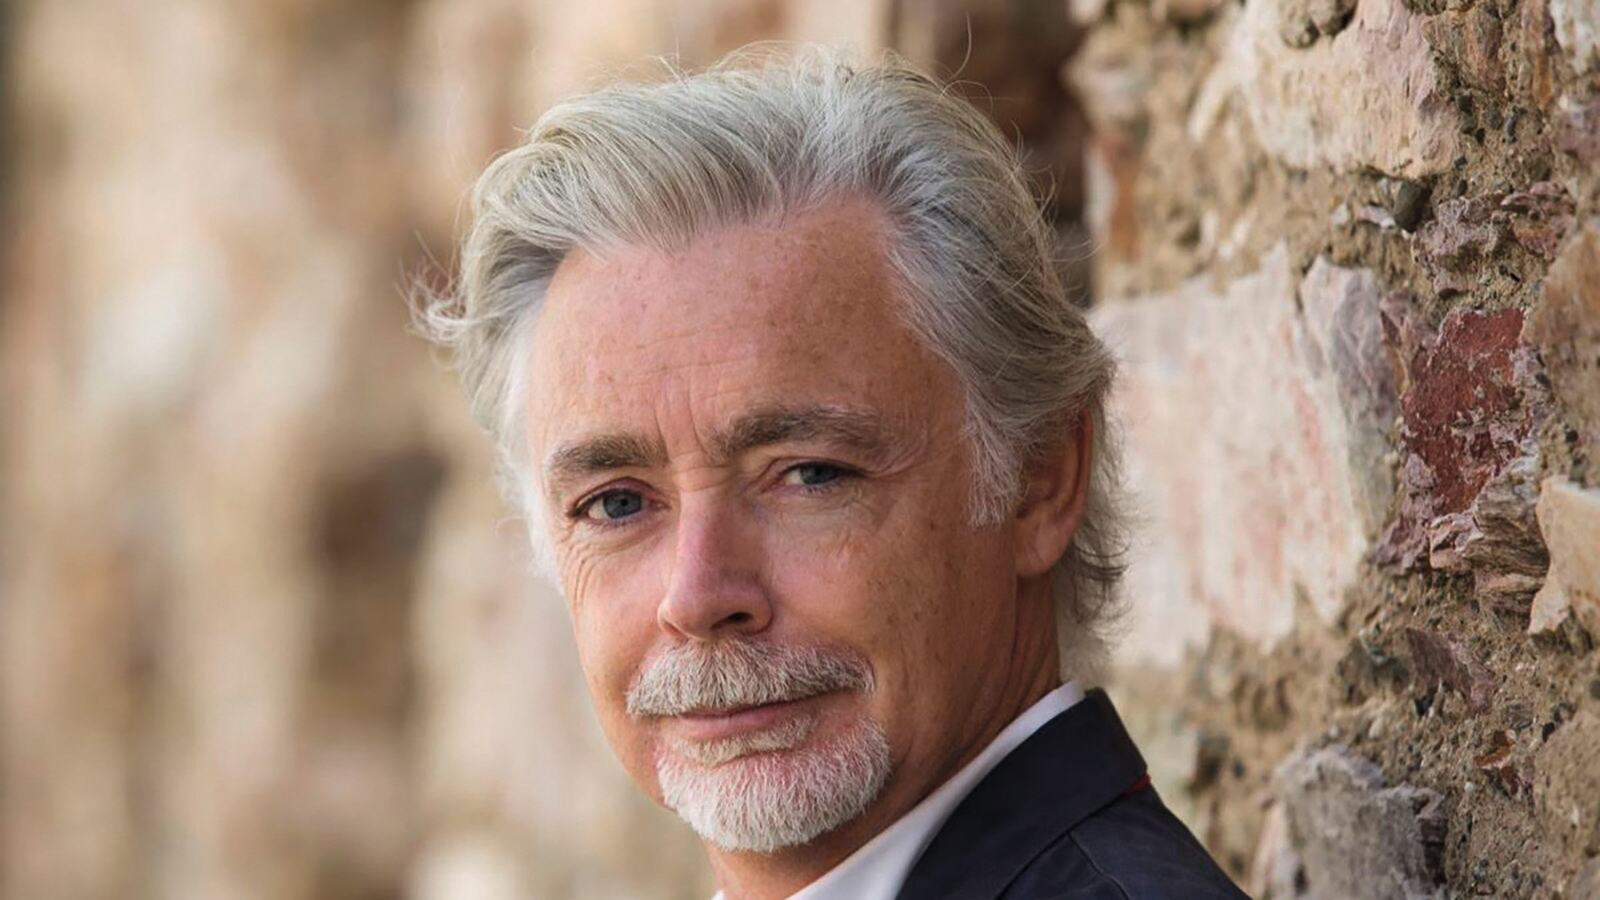 Eoin Colfer Chats To Bex About 'The Fowl Twins'!